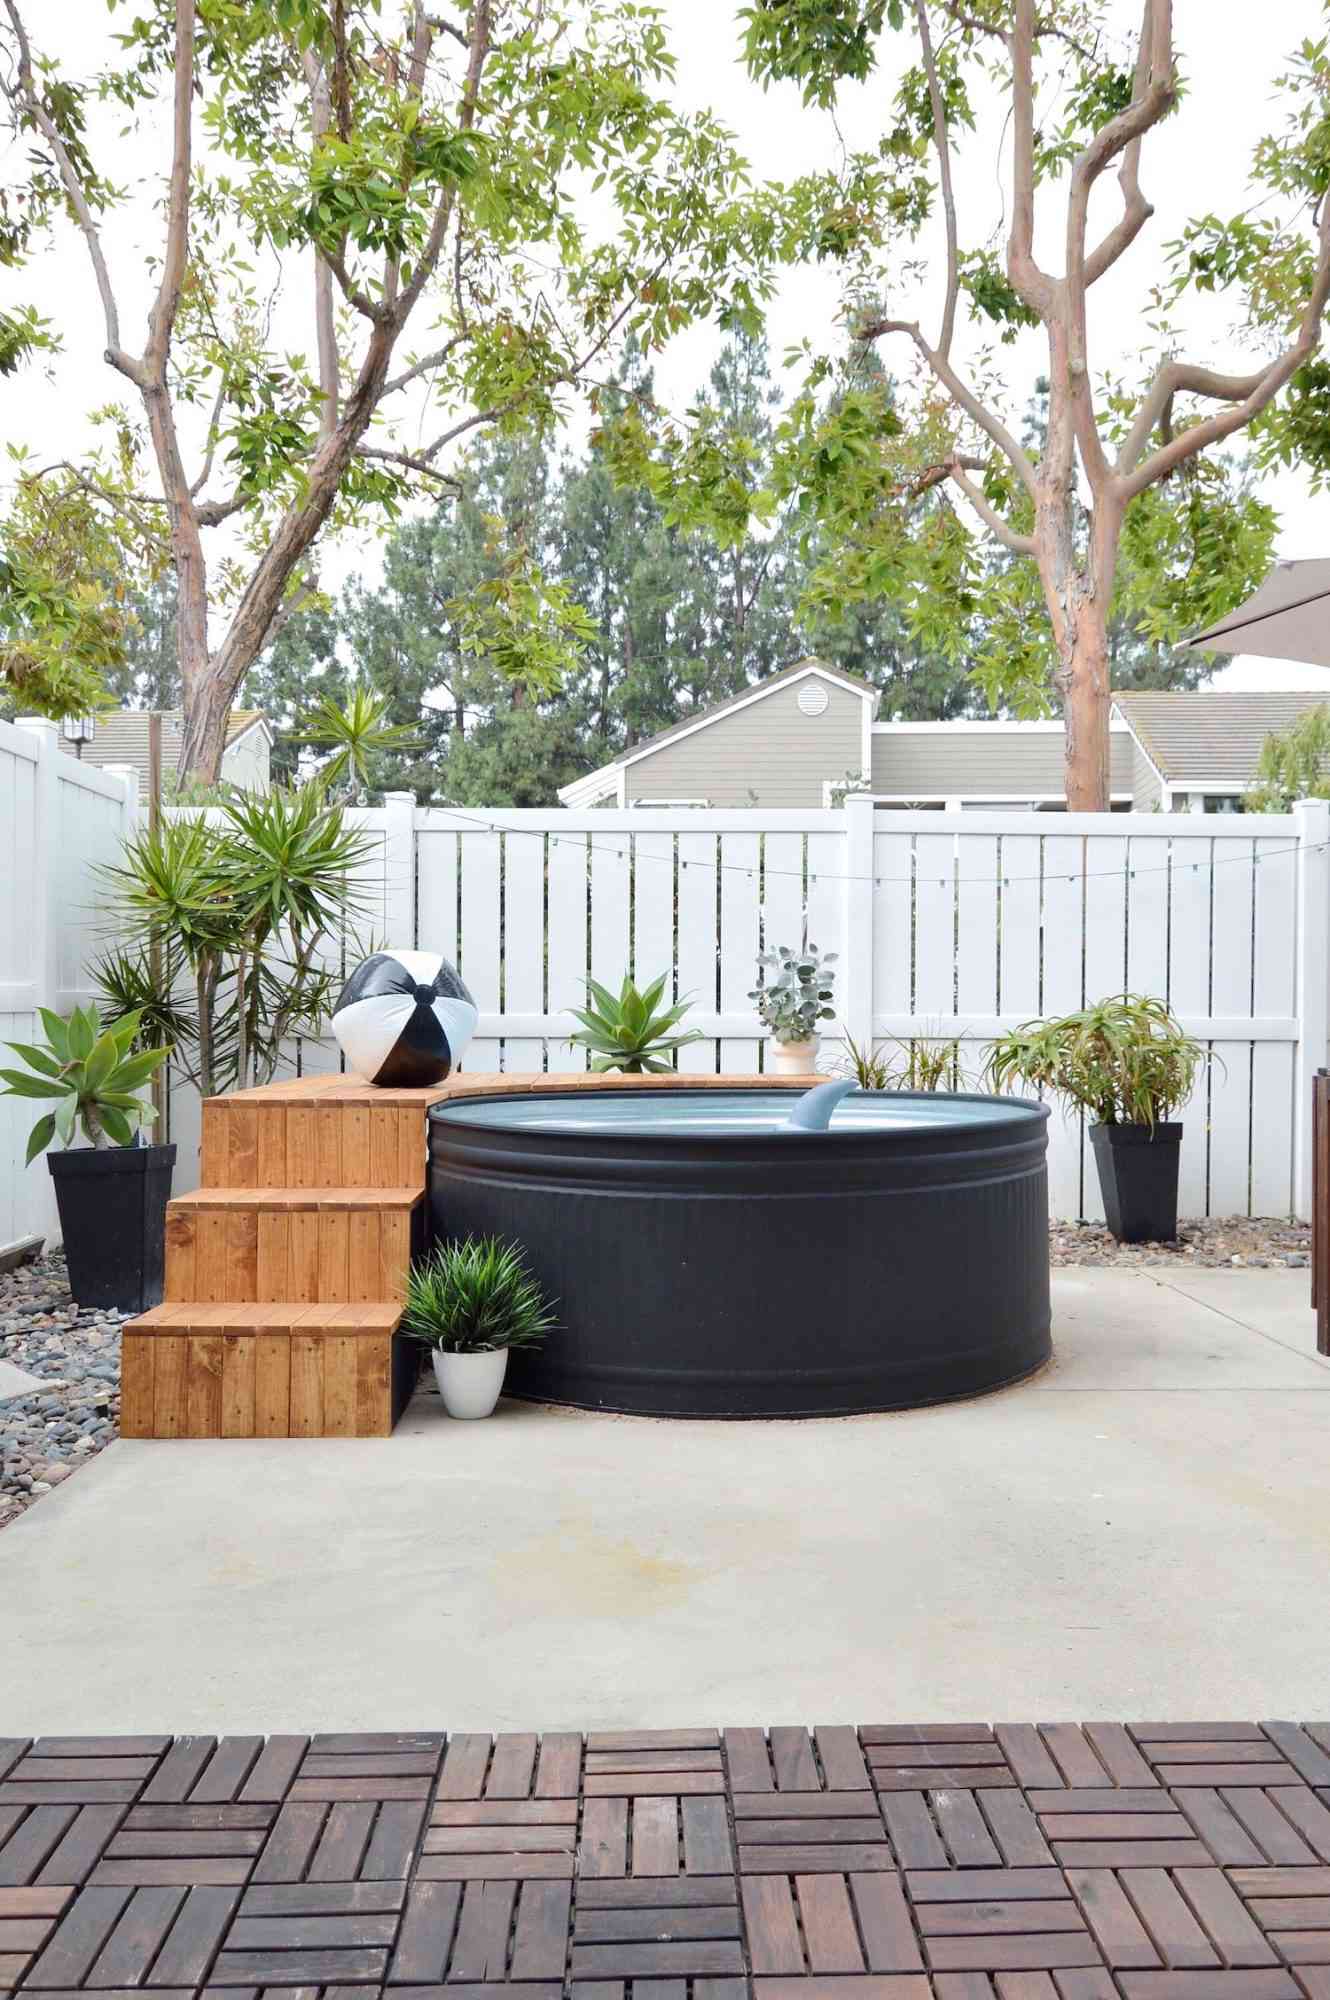 black stock tank pool next to white outdoor fence in backyard